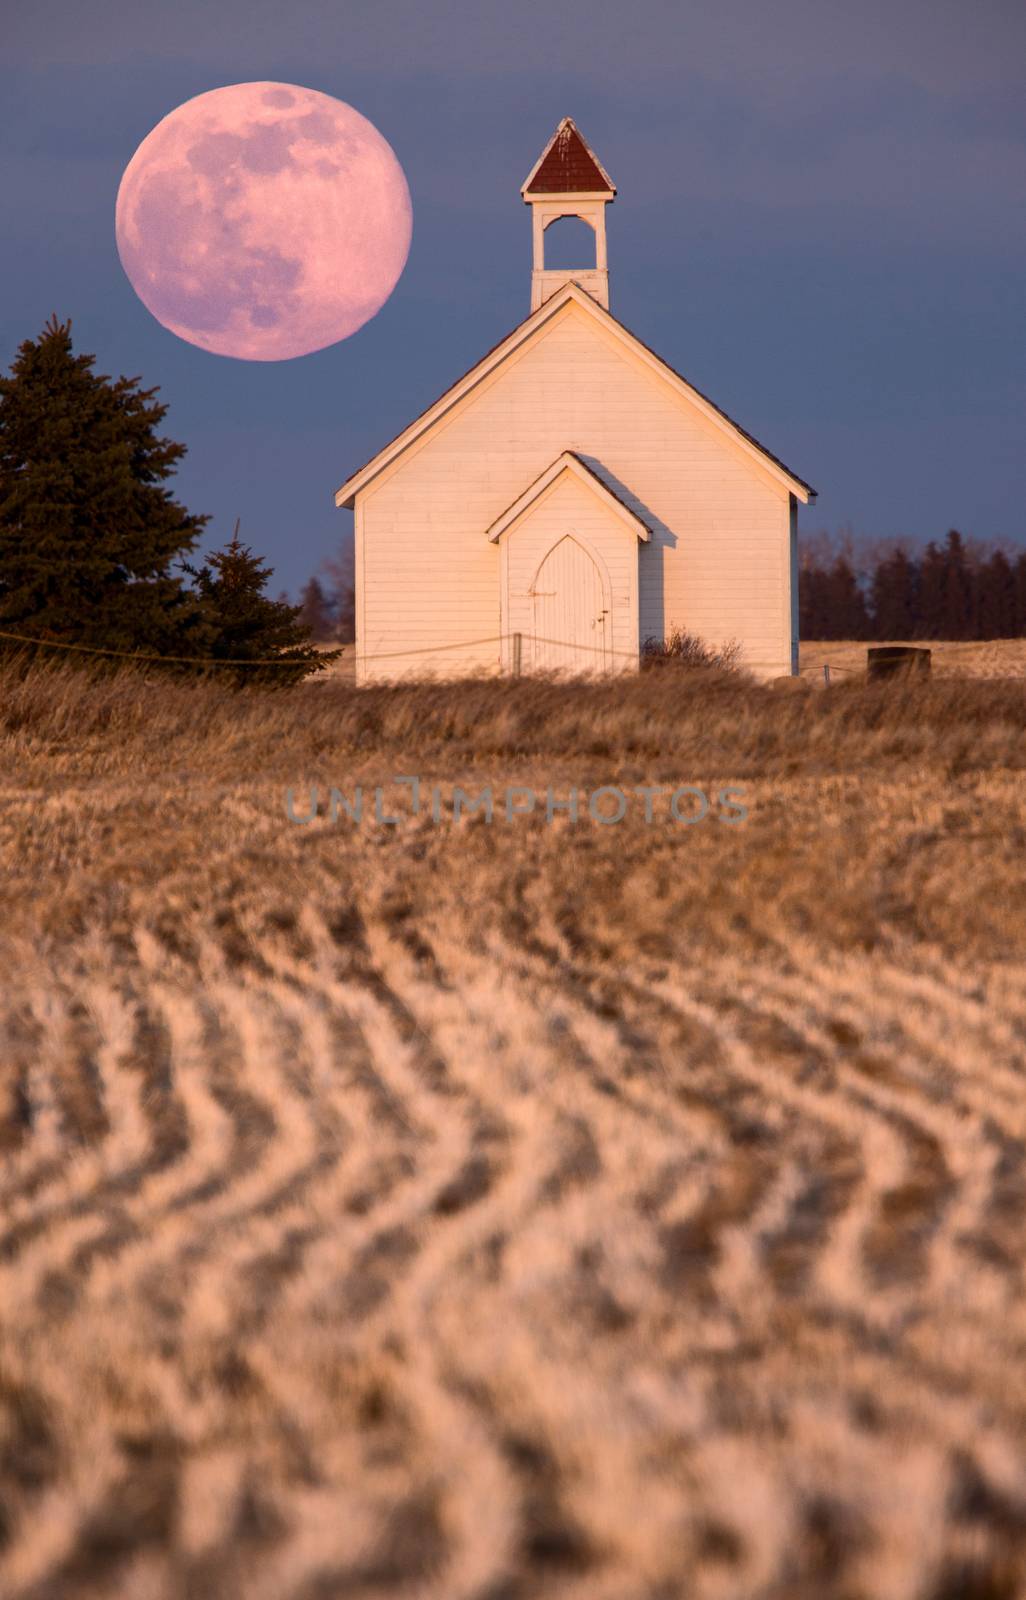 Full Pink Moon by pictureguy